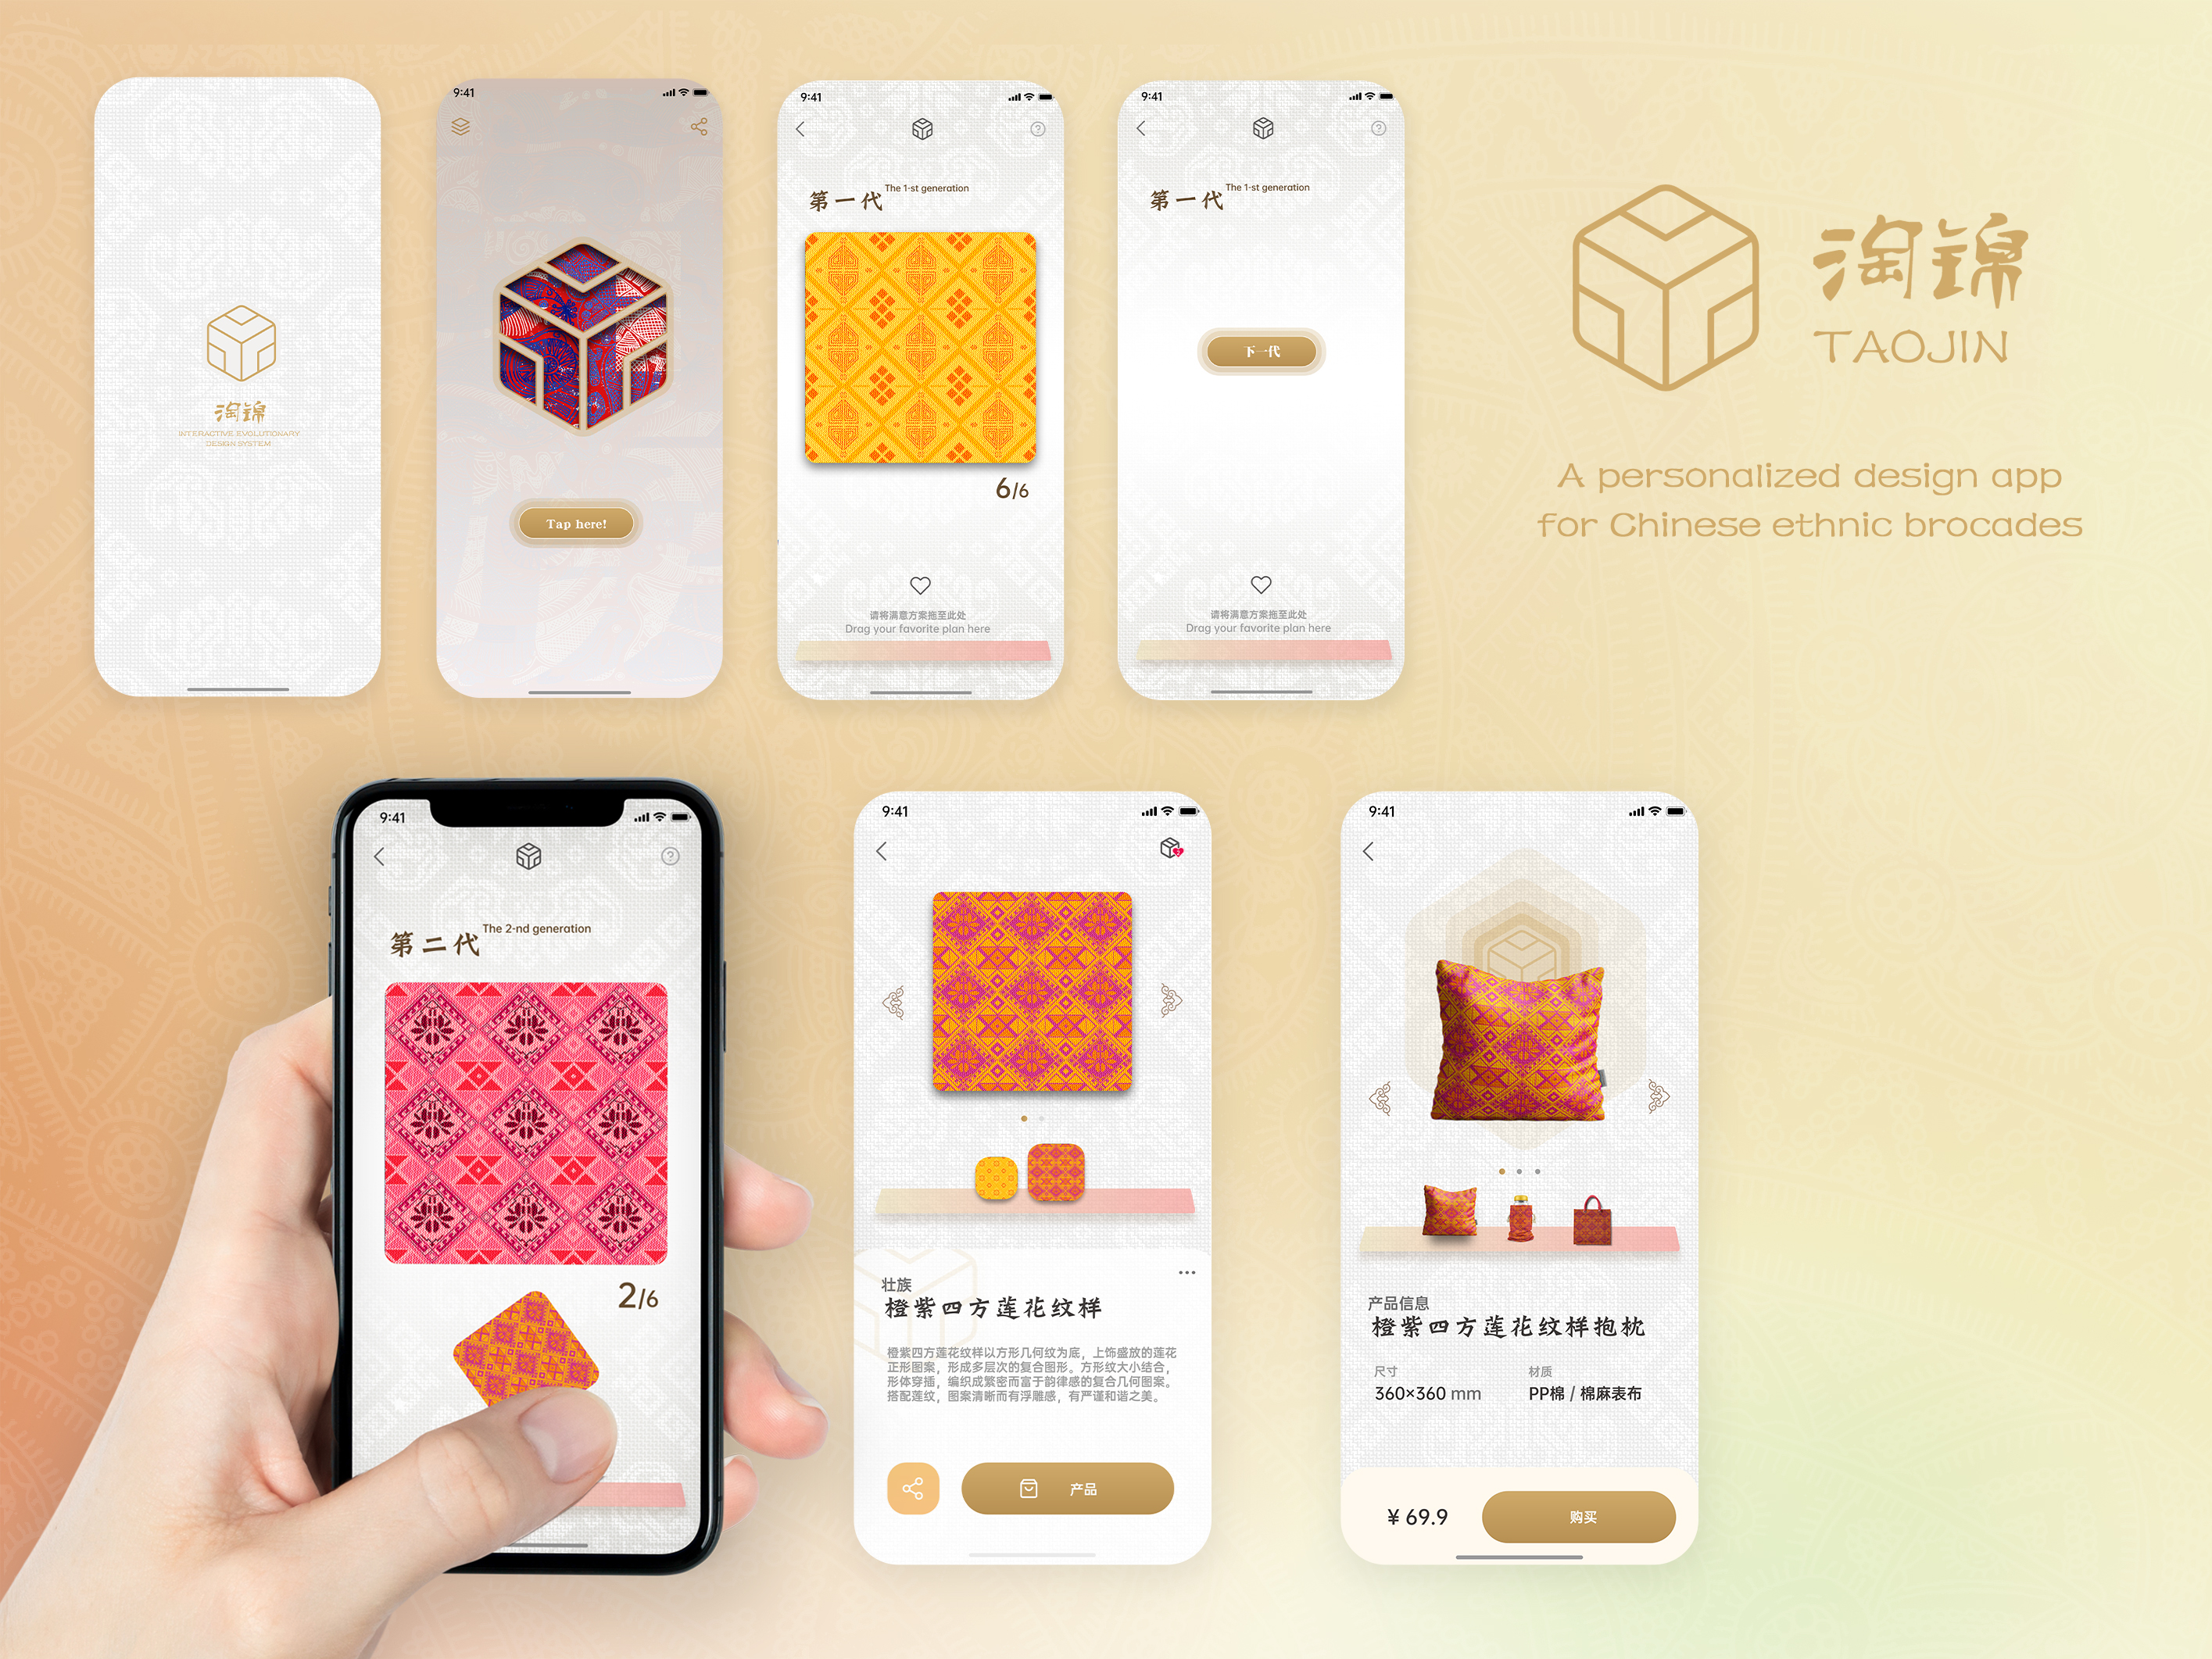 Personalized design app for Chinese ethnic brocades